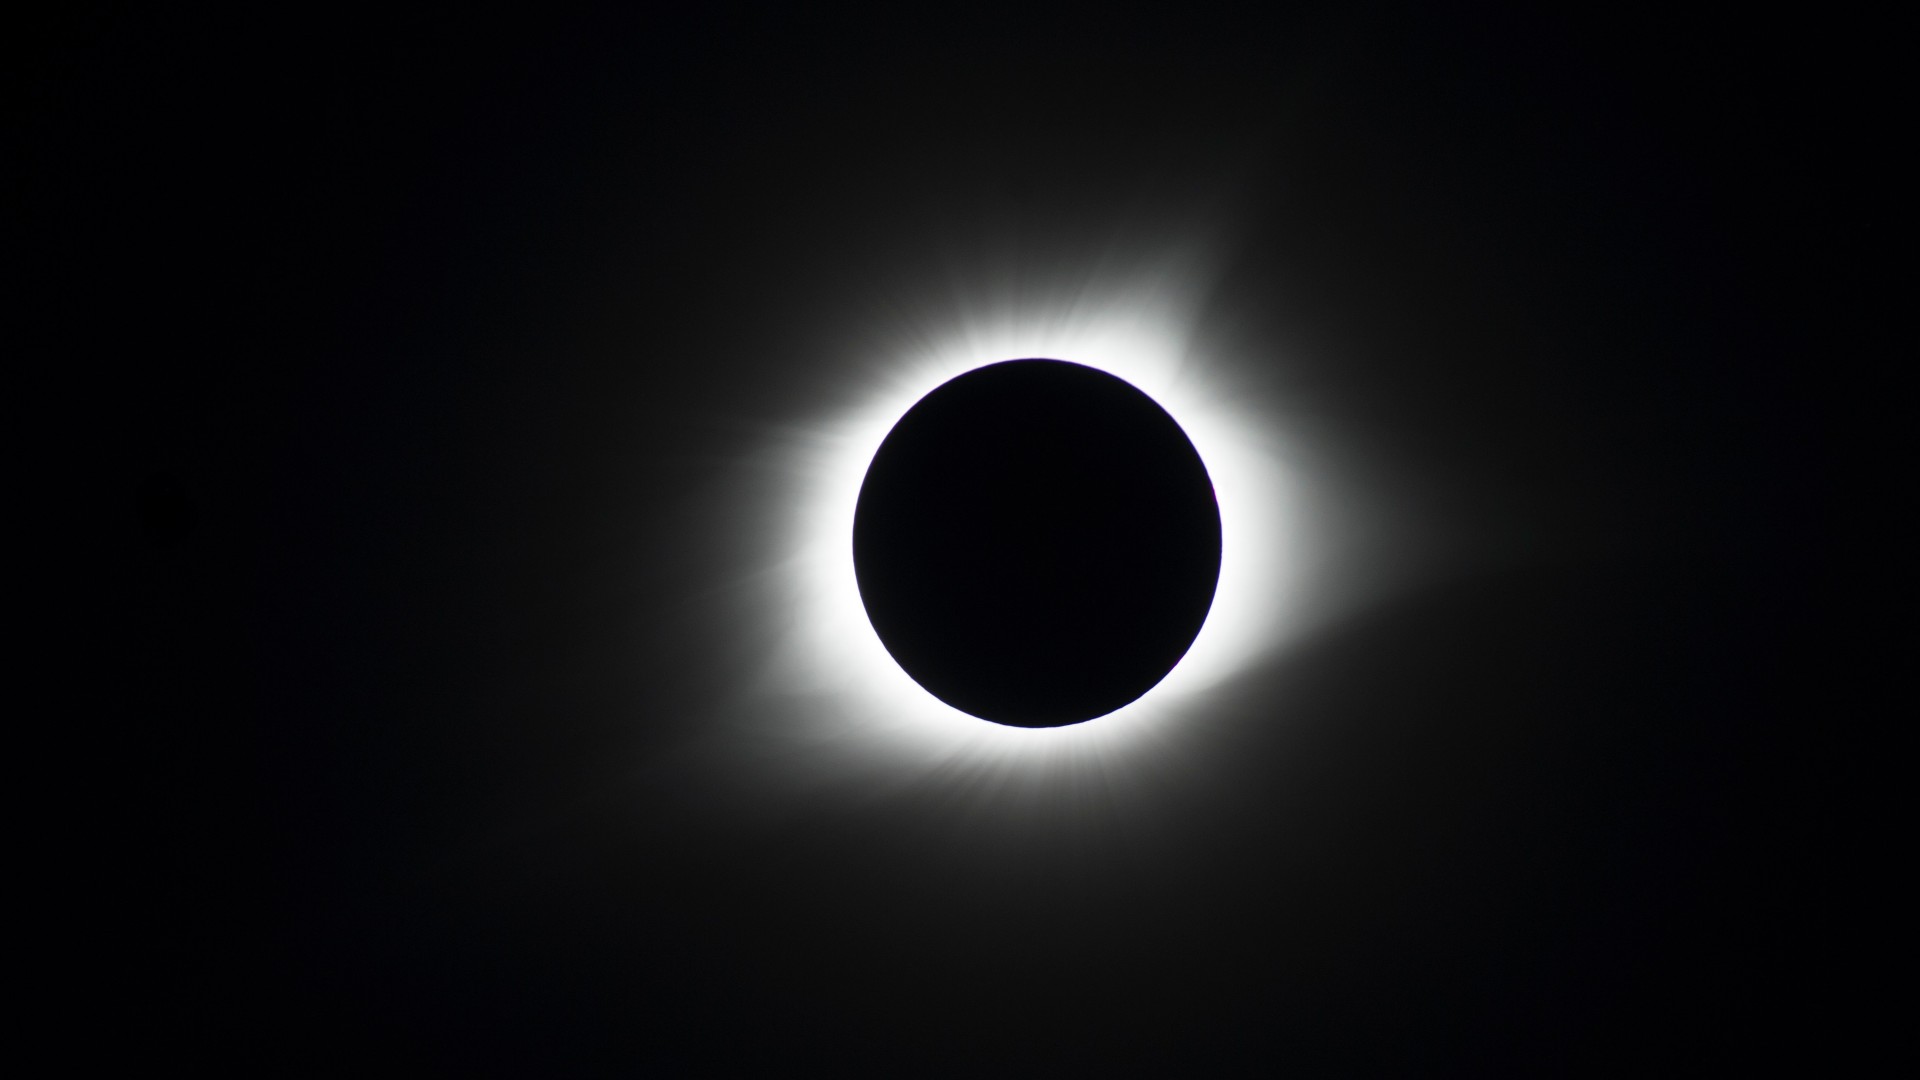 Total solar eclipse on August 21, 2017. Here we see a black circle (moon) surrounded by a circle of white light (sun), all against a black background.